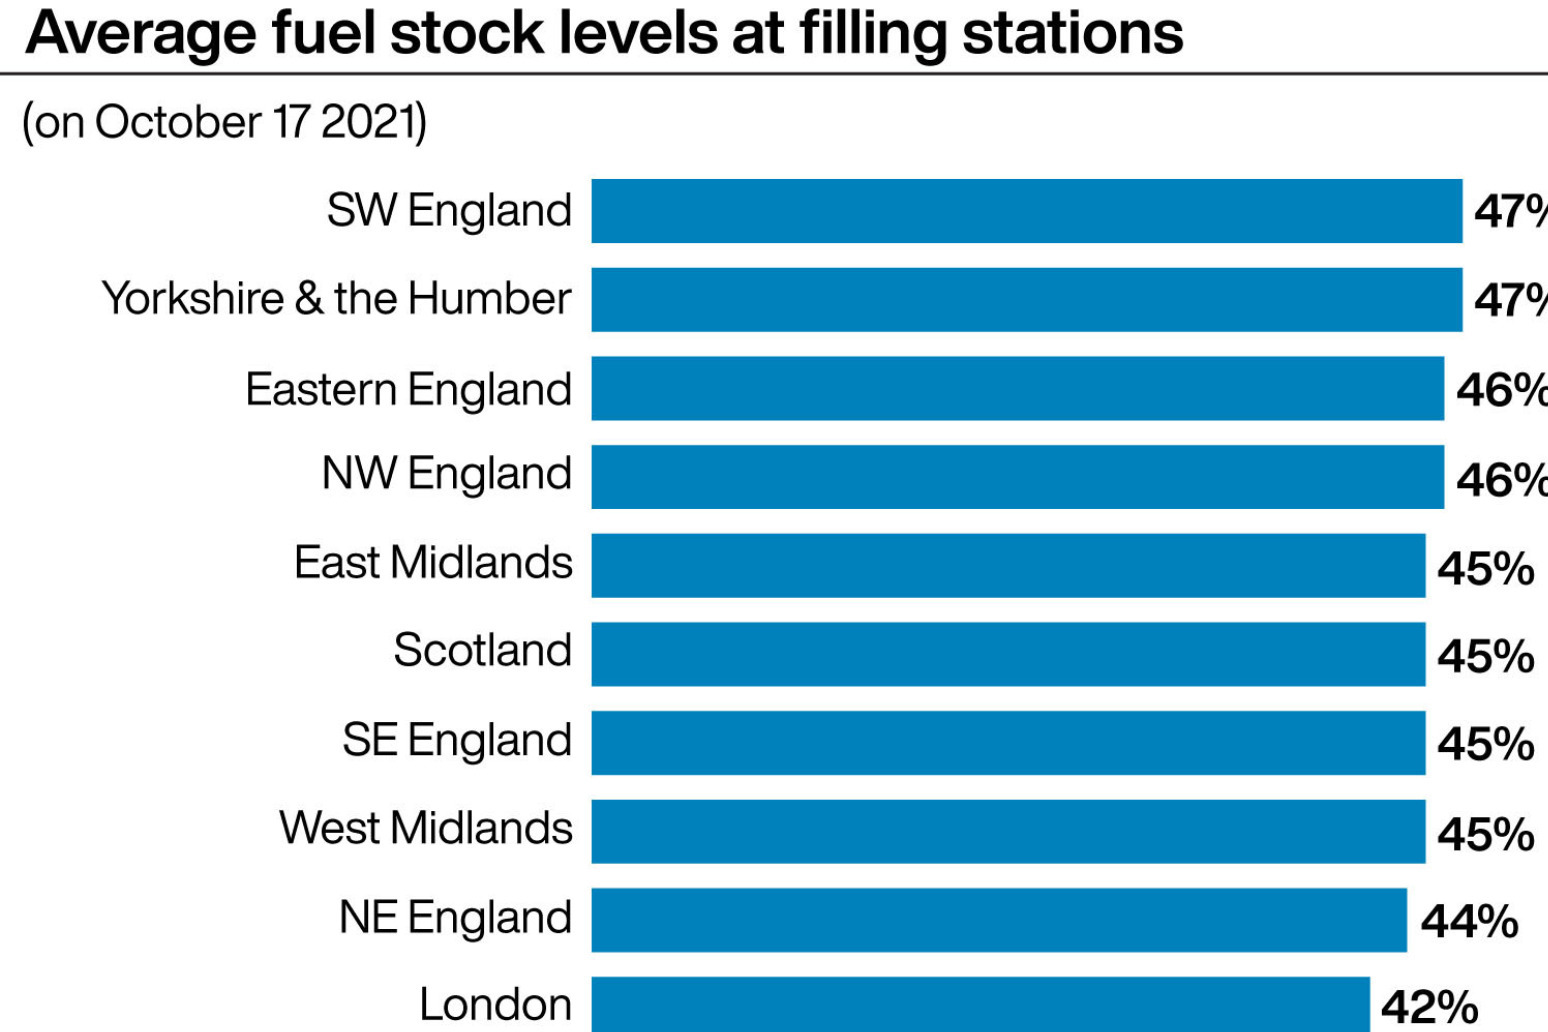 Fuel stocks recover after crisis 